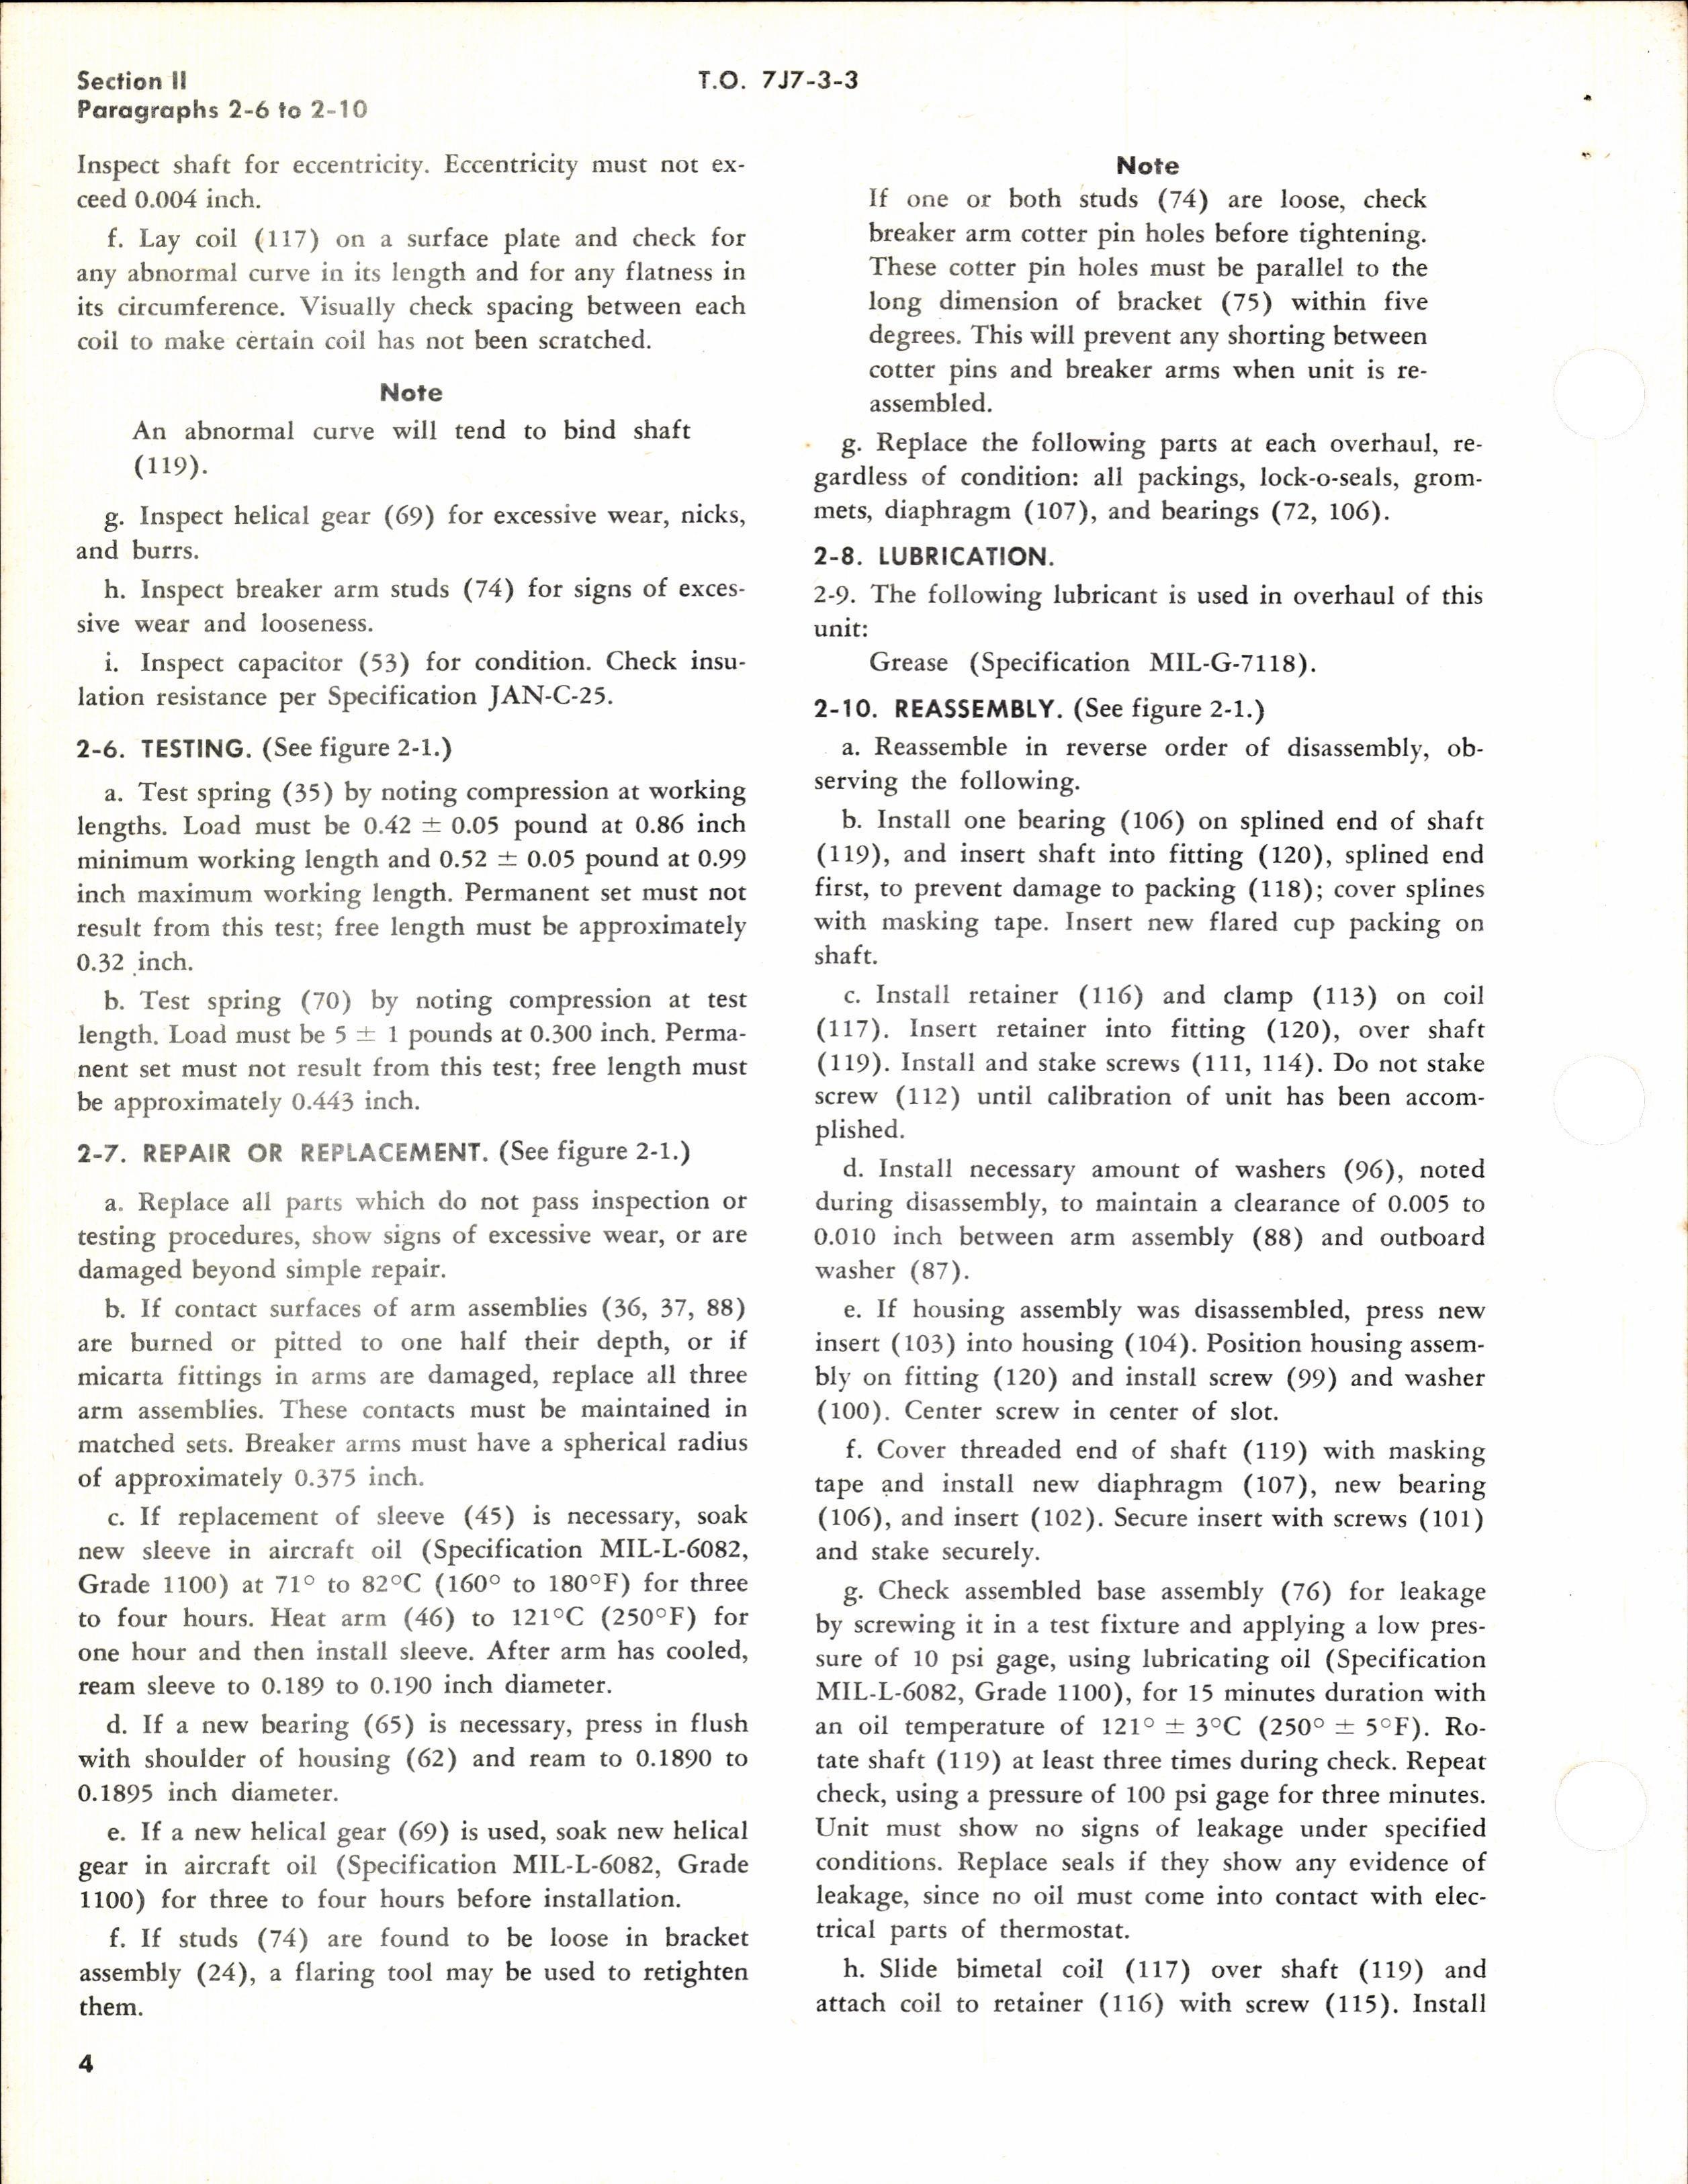 Sample page 6 from AirCorps Library document: Overhaul Instructions for Floating Control Oil Thermostat